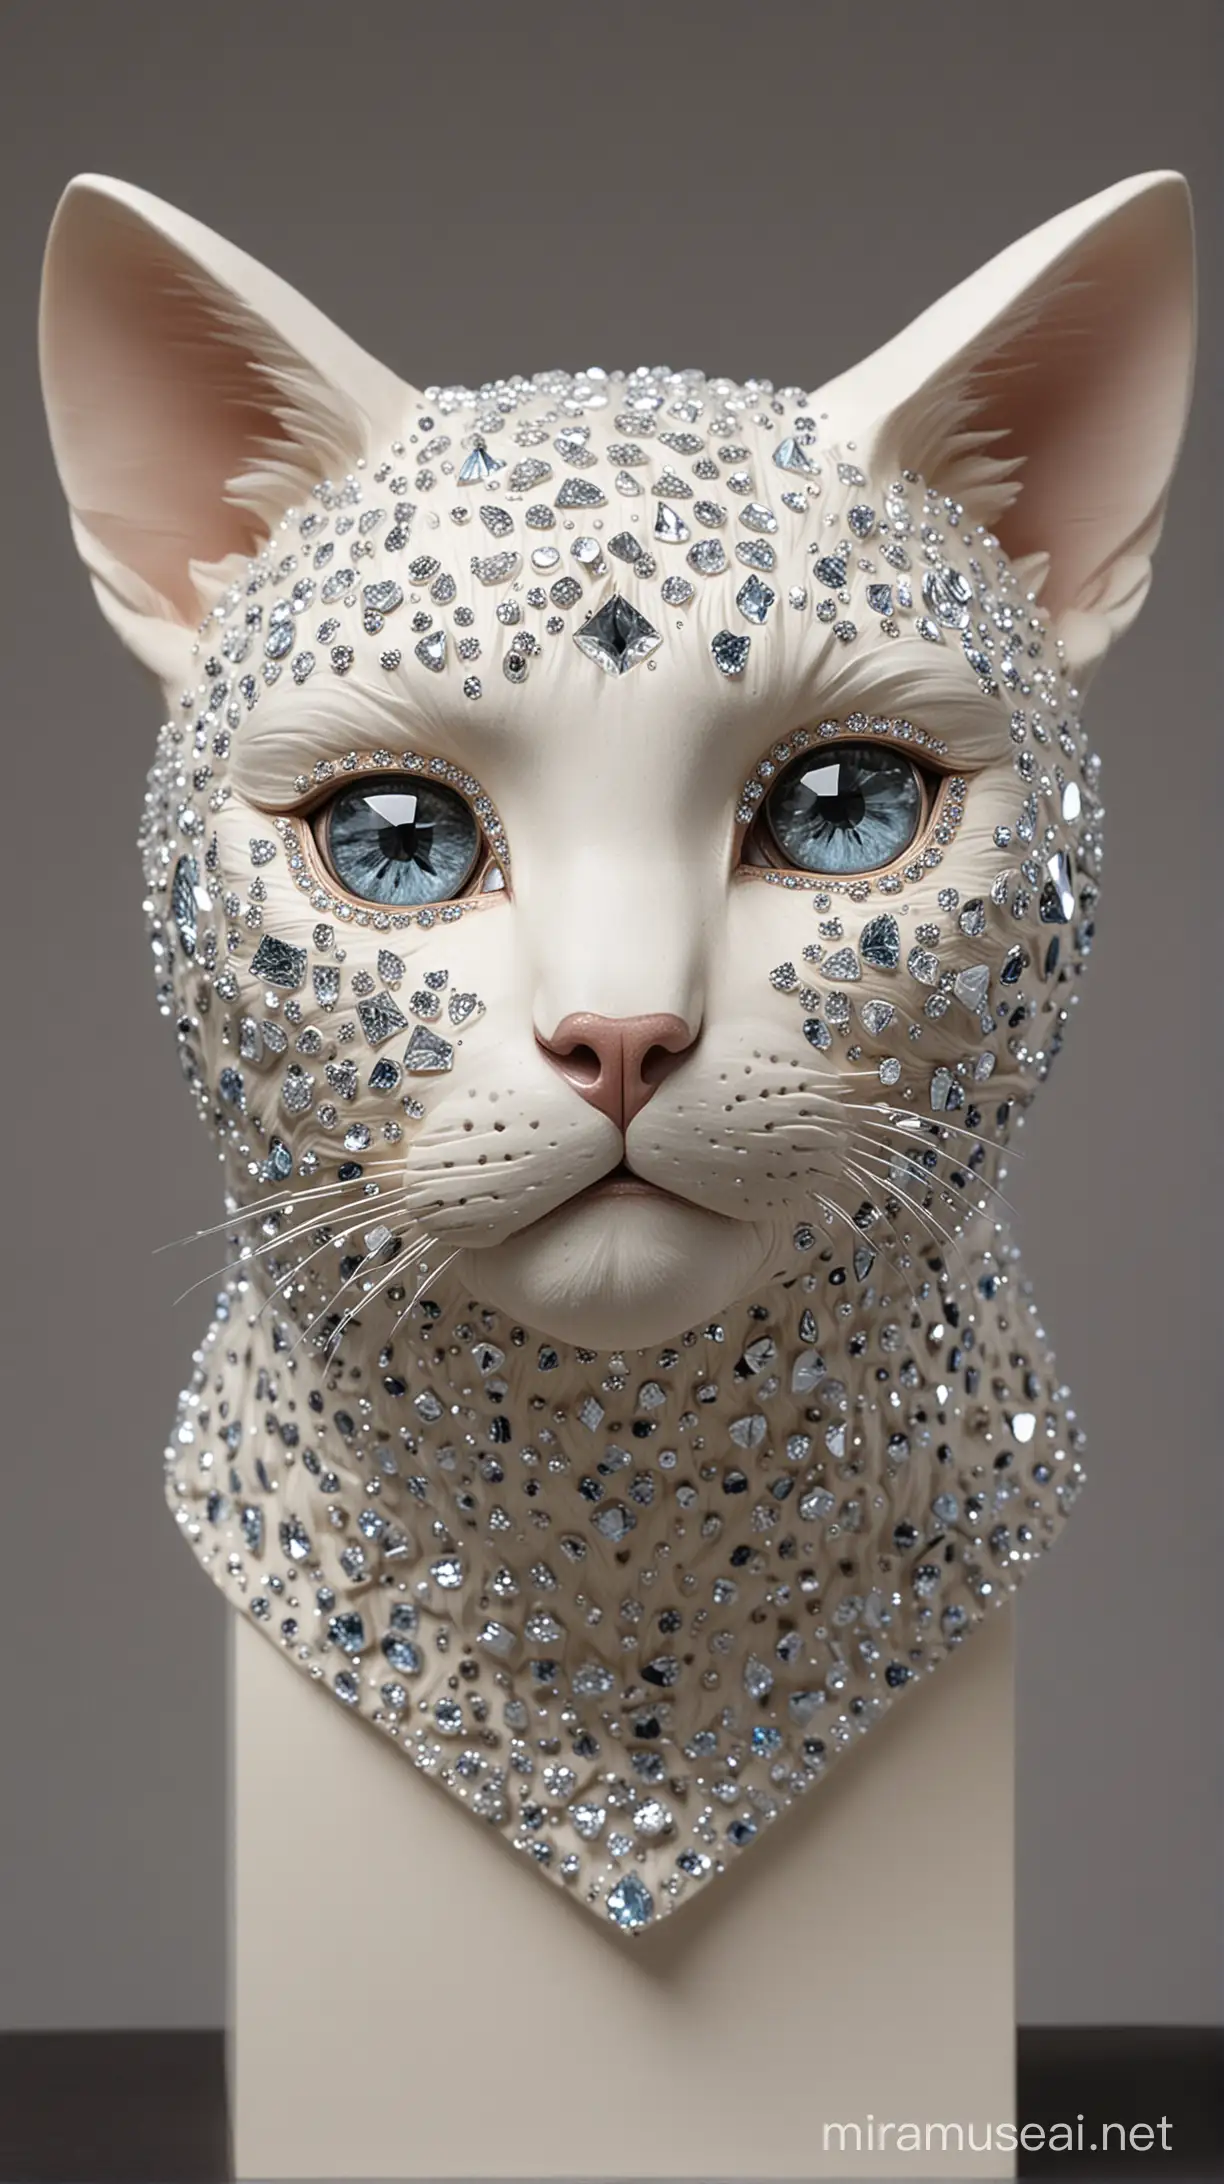 a sculpture depicting a cat face looking into the camera. She has cute face with diamonds all over it